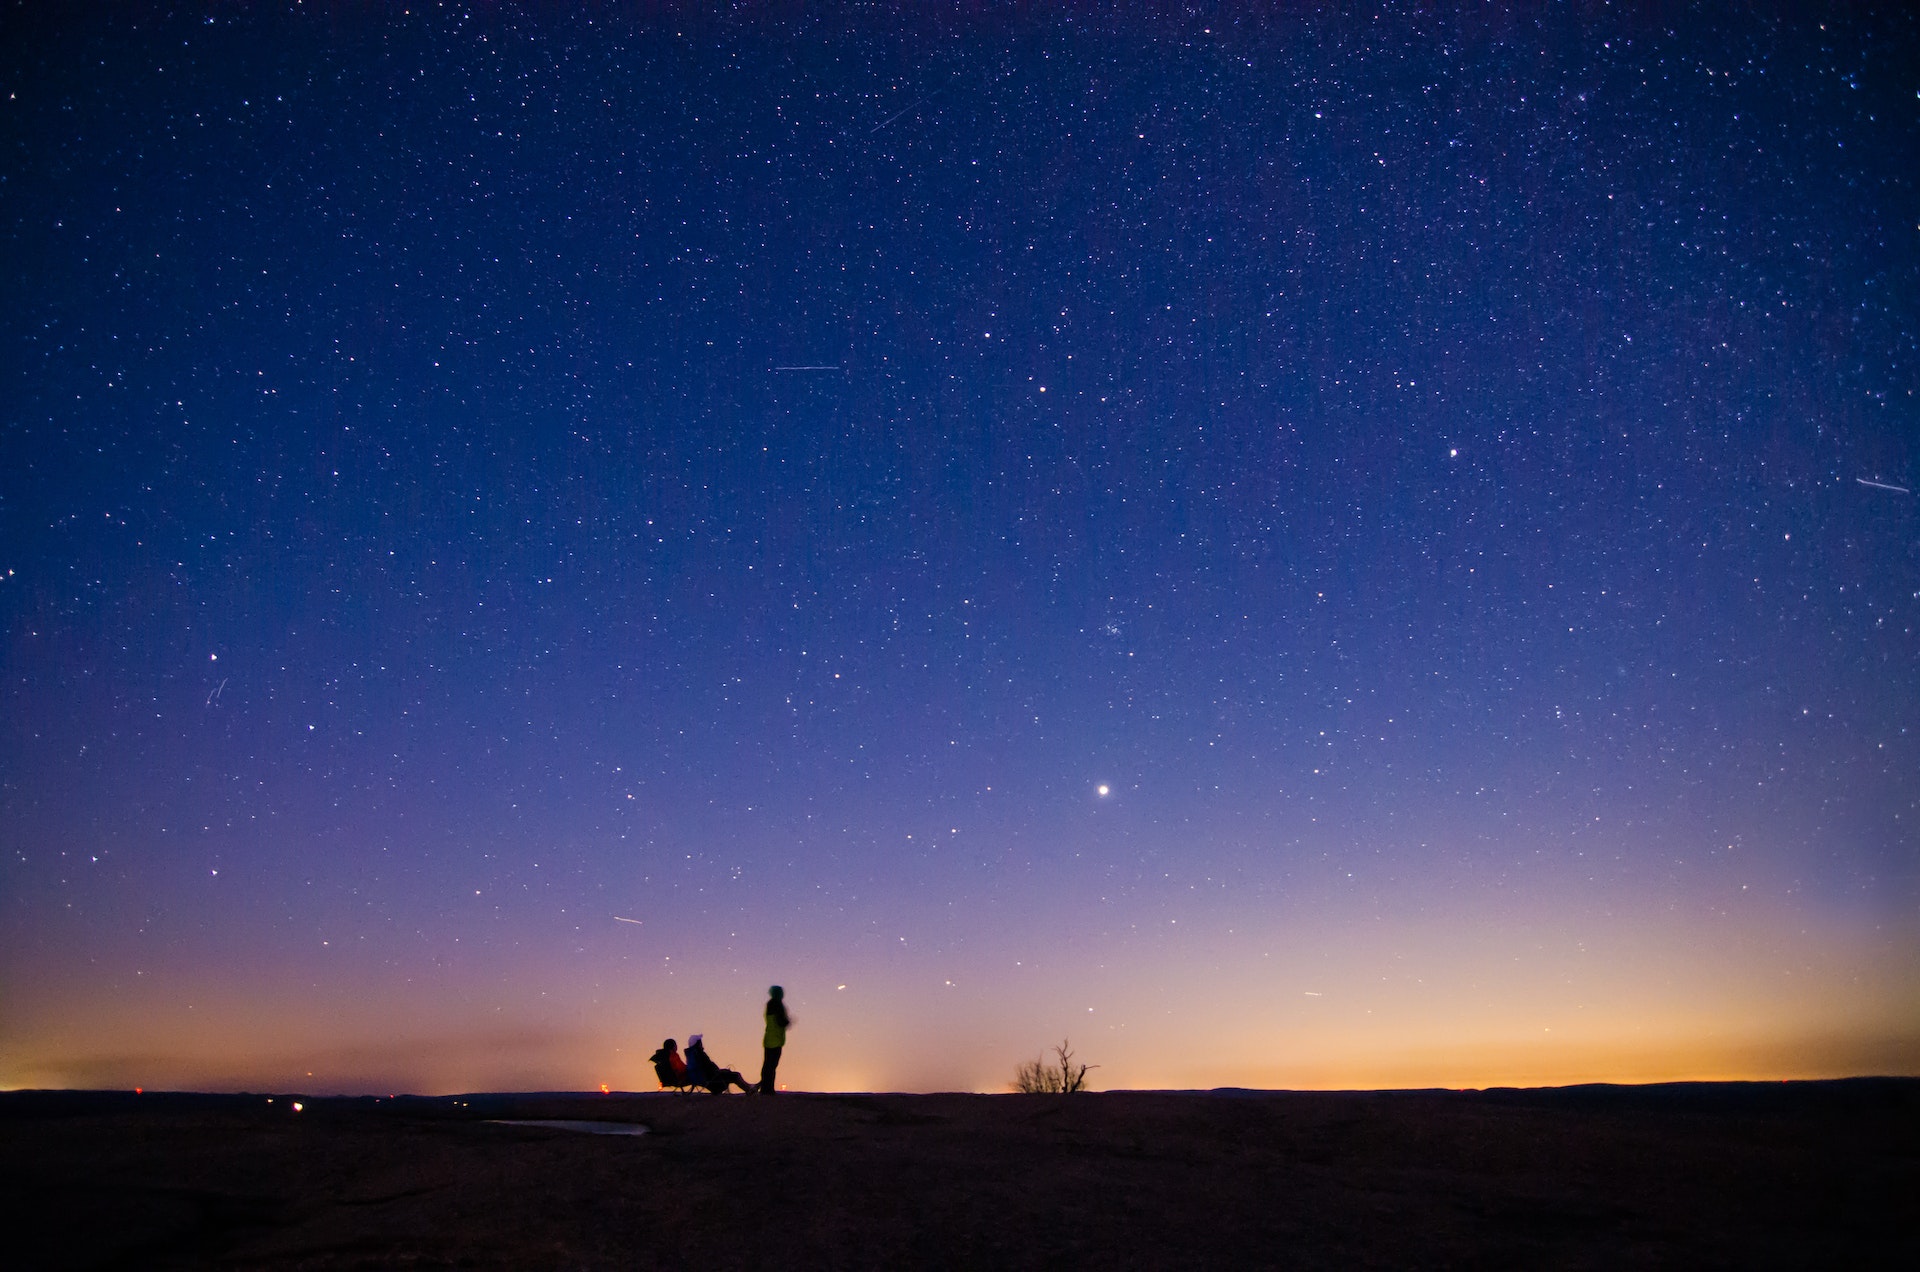 People in silhouette gaze at a sky filled with stars